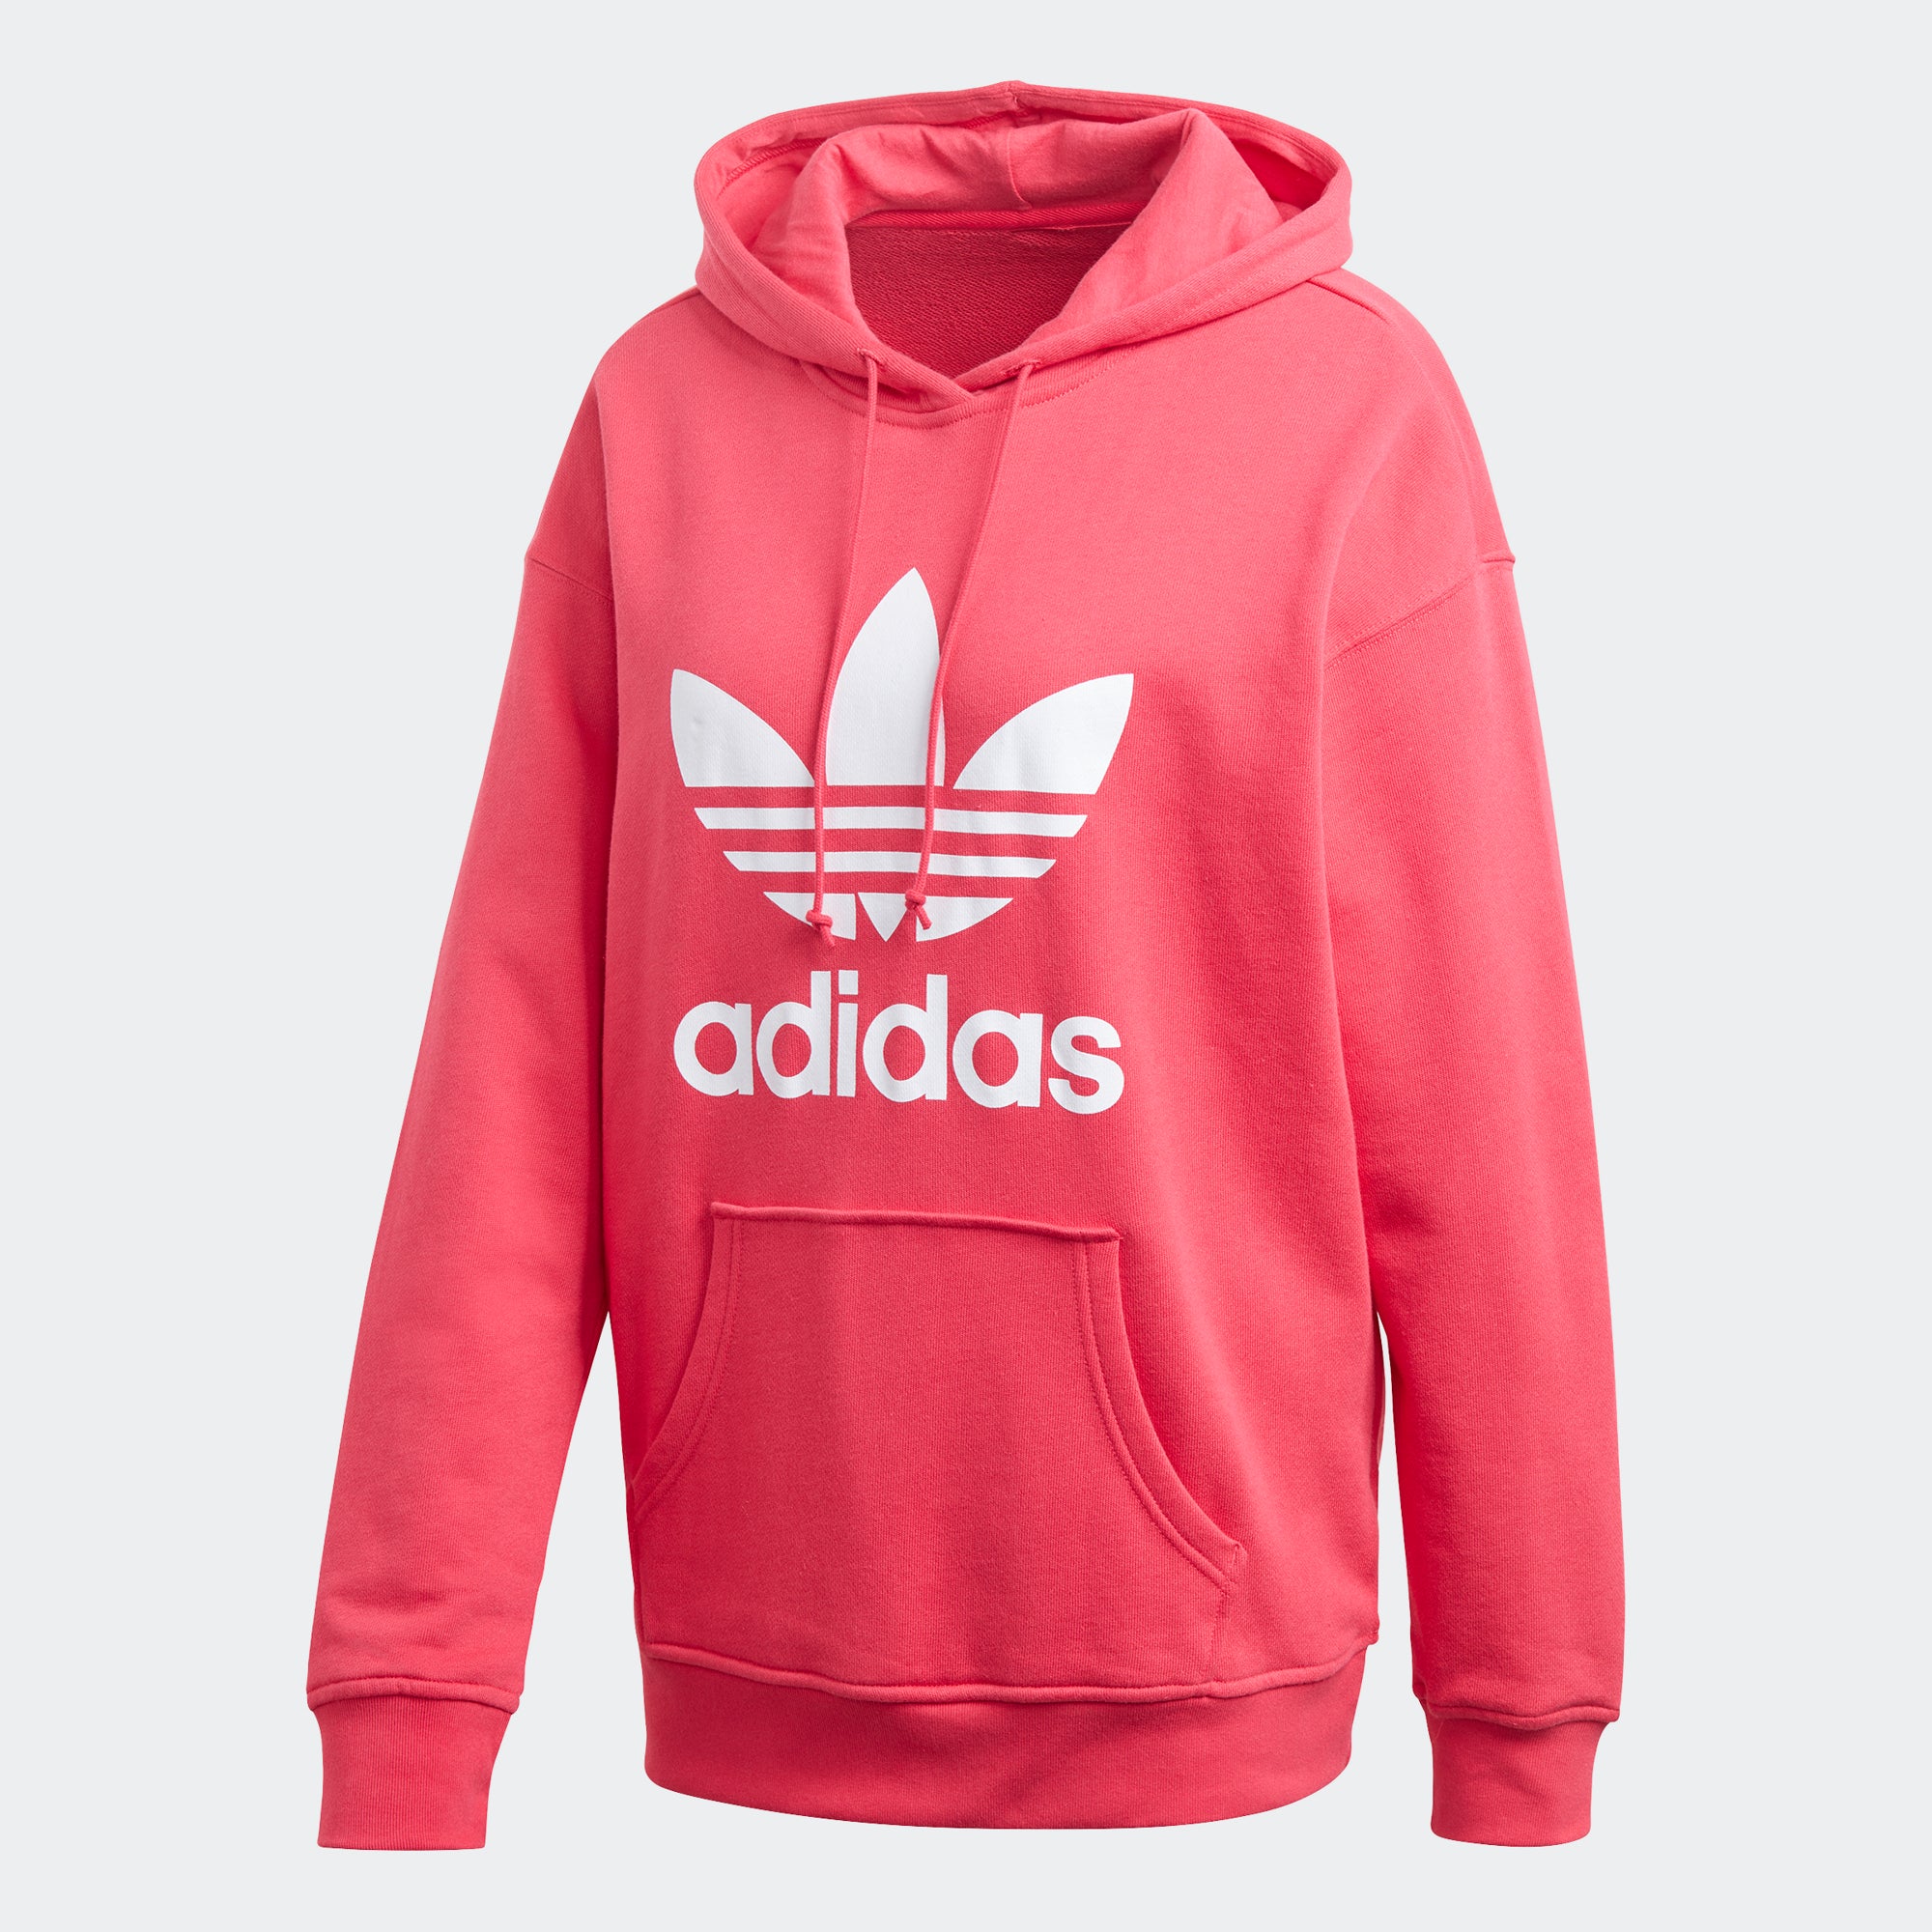 adidas Adicolor Trefoil Hoodie Power Pink GD2439 | Chicago City Sports